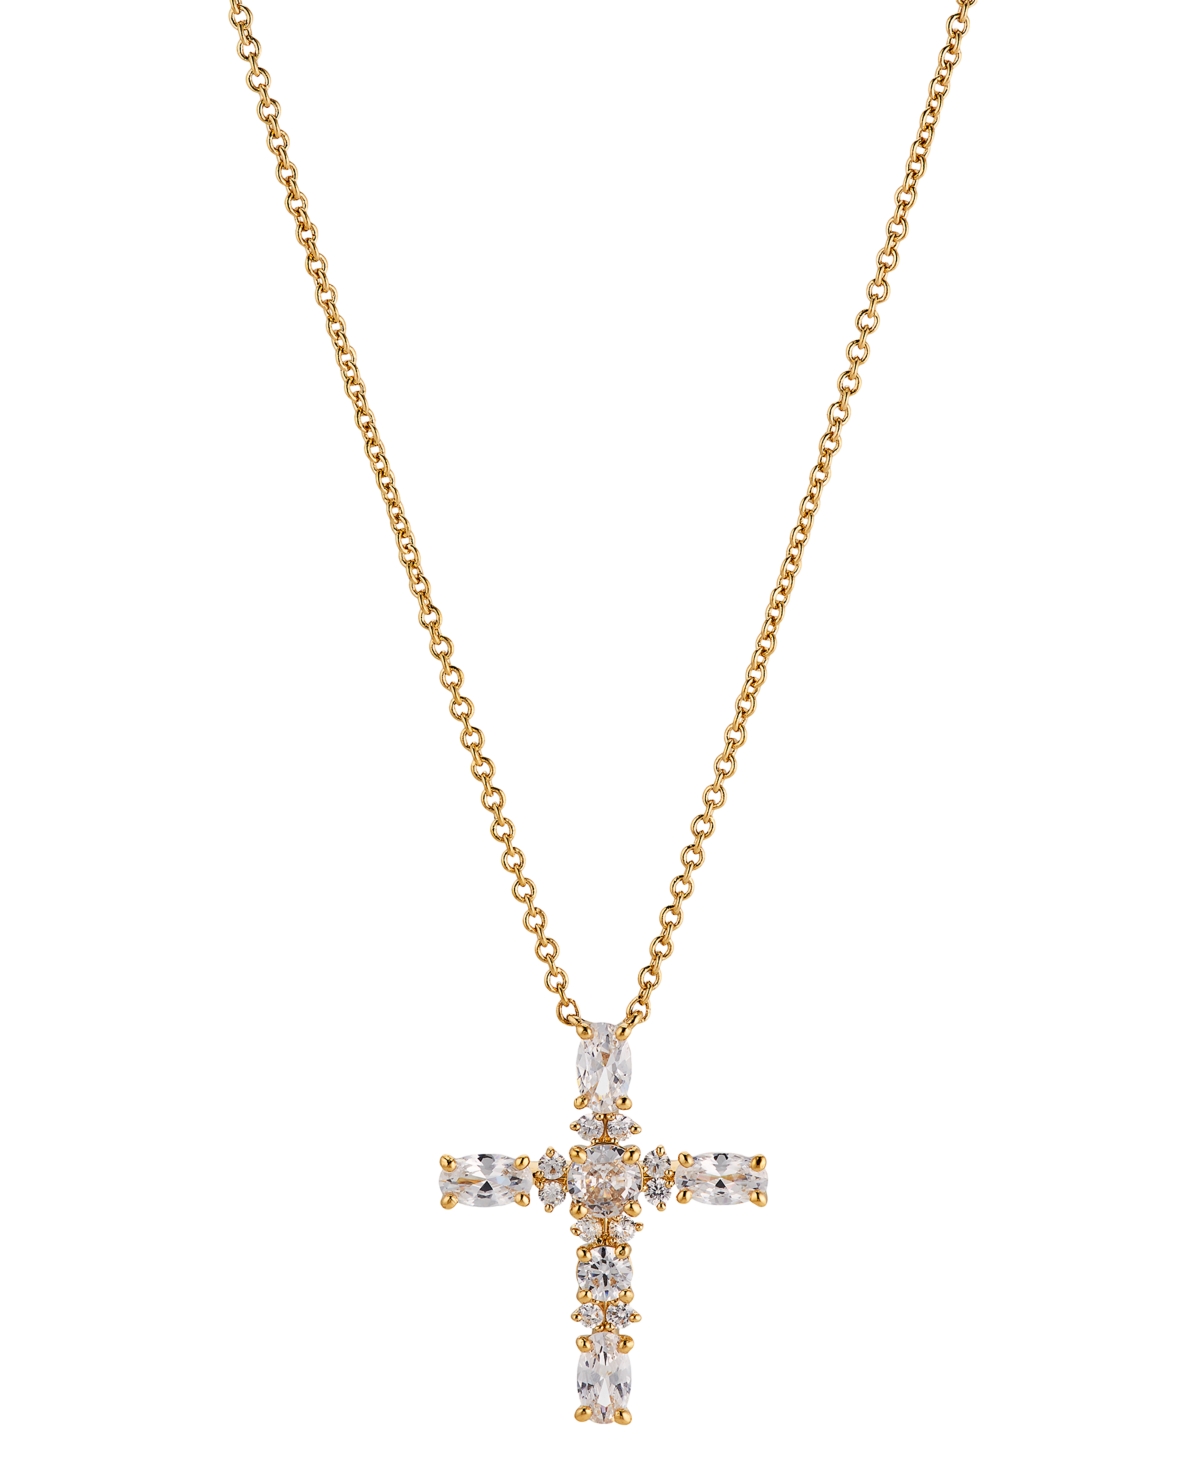 18k Gold-Plated Cubic Zirconia Cross Pendant Necklace, 16" + 2" extender, Created for Macy's - Gold